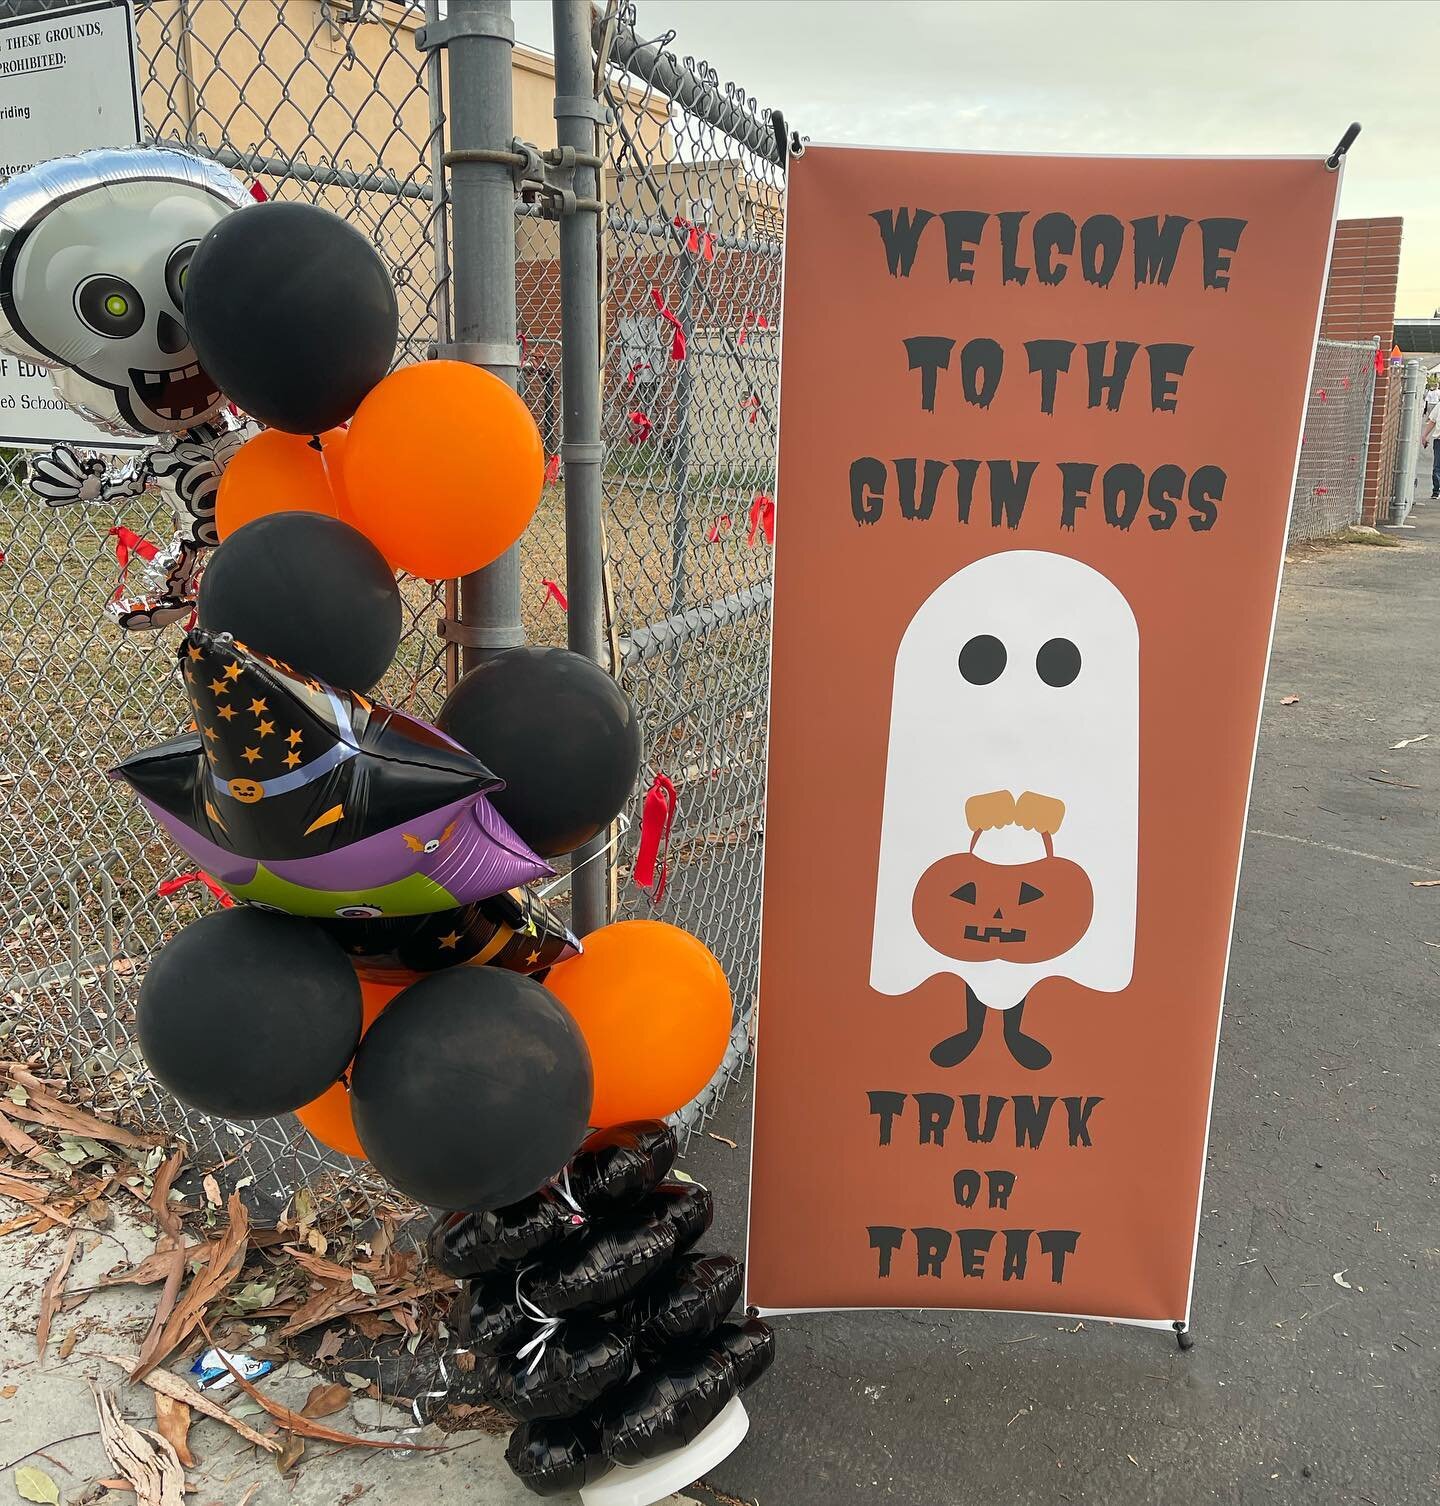 Thank you to everyone who came out to our 2nd Annual Guin Foss Trunk or Treat! Thank you to all the volunteers who helped make this happen! It was a great night of community and fun for all! 👻🎃